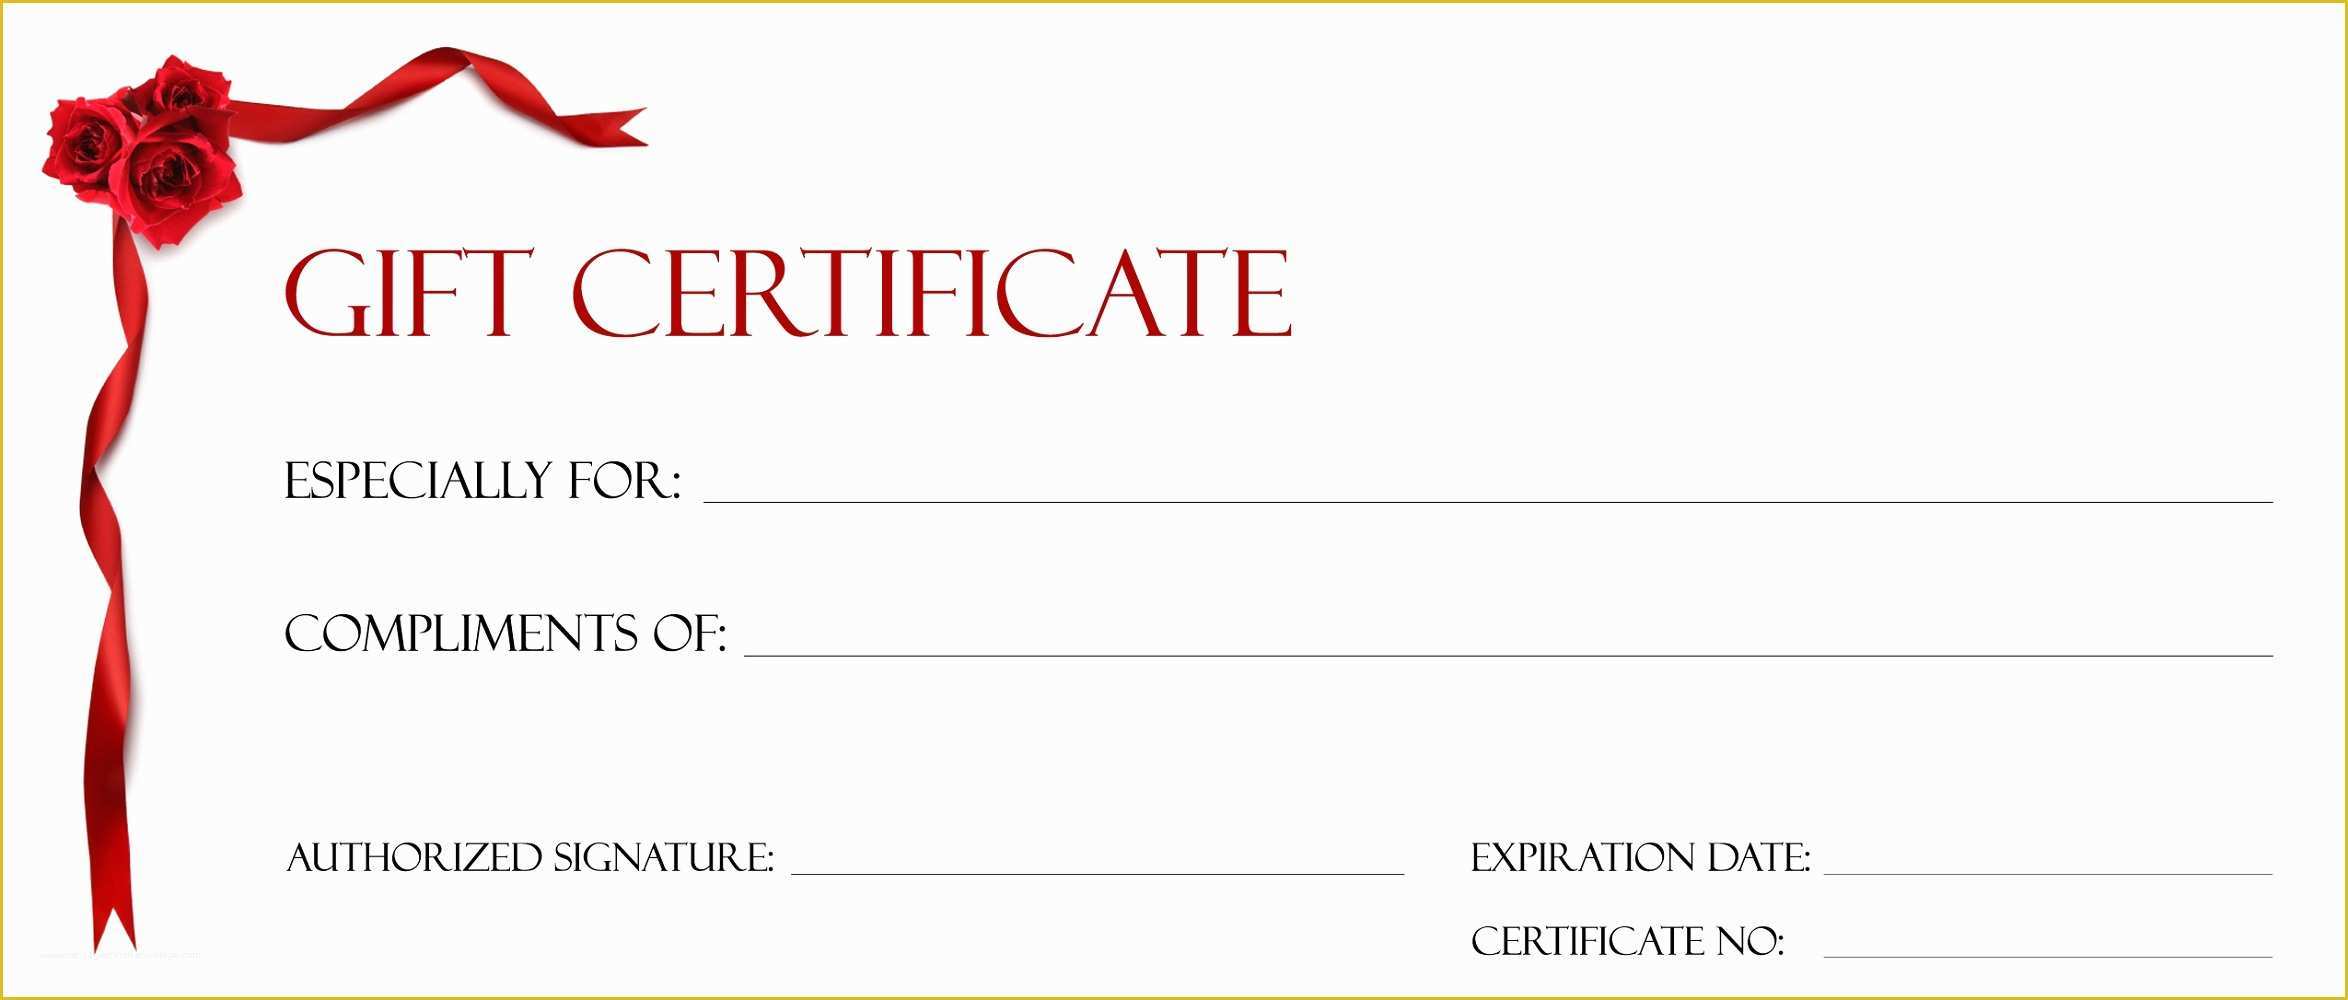 Gift Certificate Template Free Of Gift Certificate Templates to Print